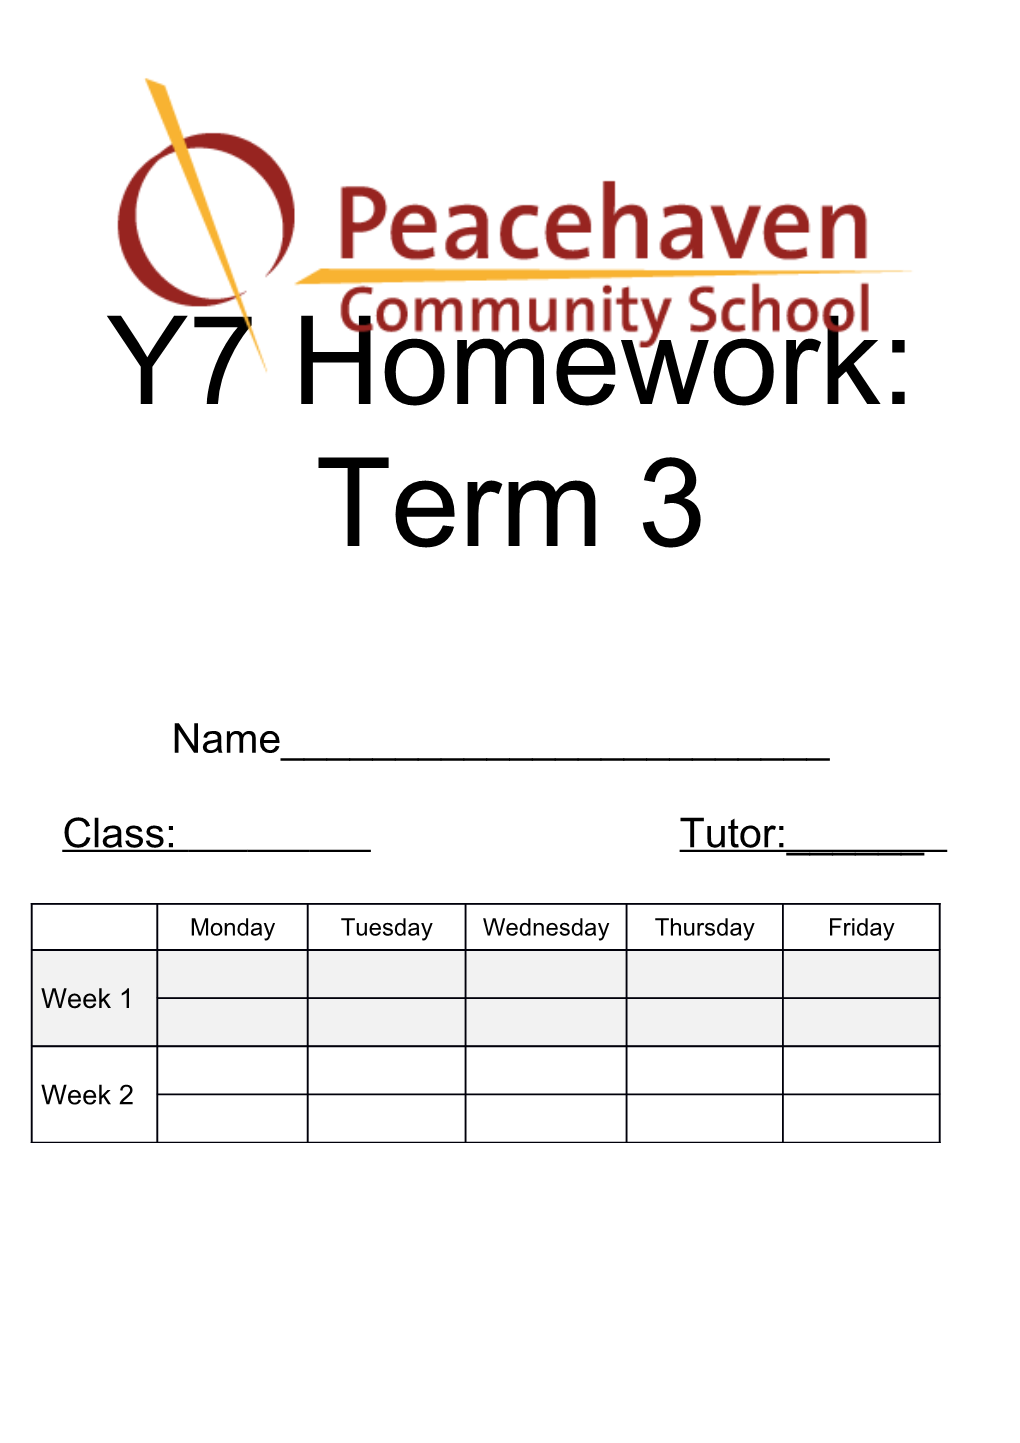 Homework Guidance for Y7 Parents and Carers